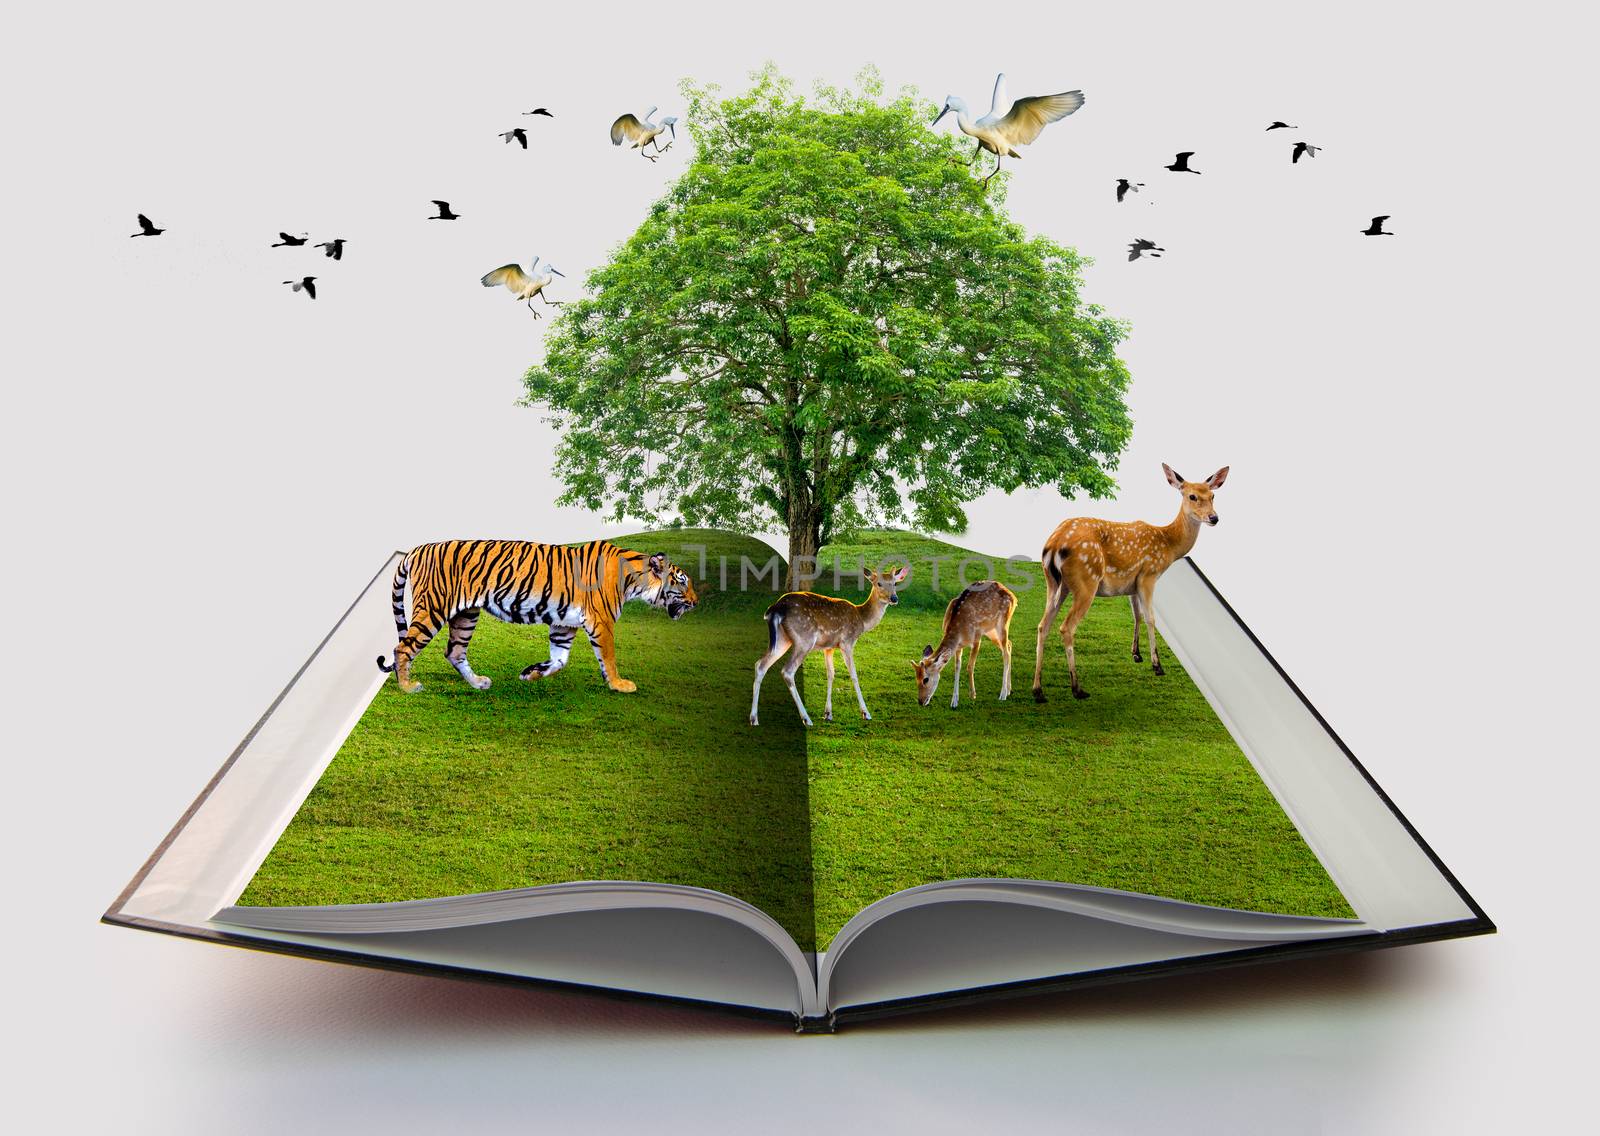 Wildlife Conservation tiger Deer Bird environment book of nature isolated on white open book in paper recycling 3d rendering book of nature with grass and tree growth on it over white background by sarayut_thaneerat